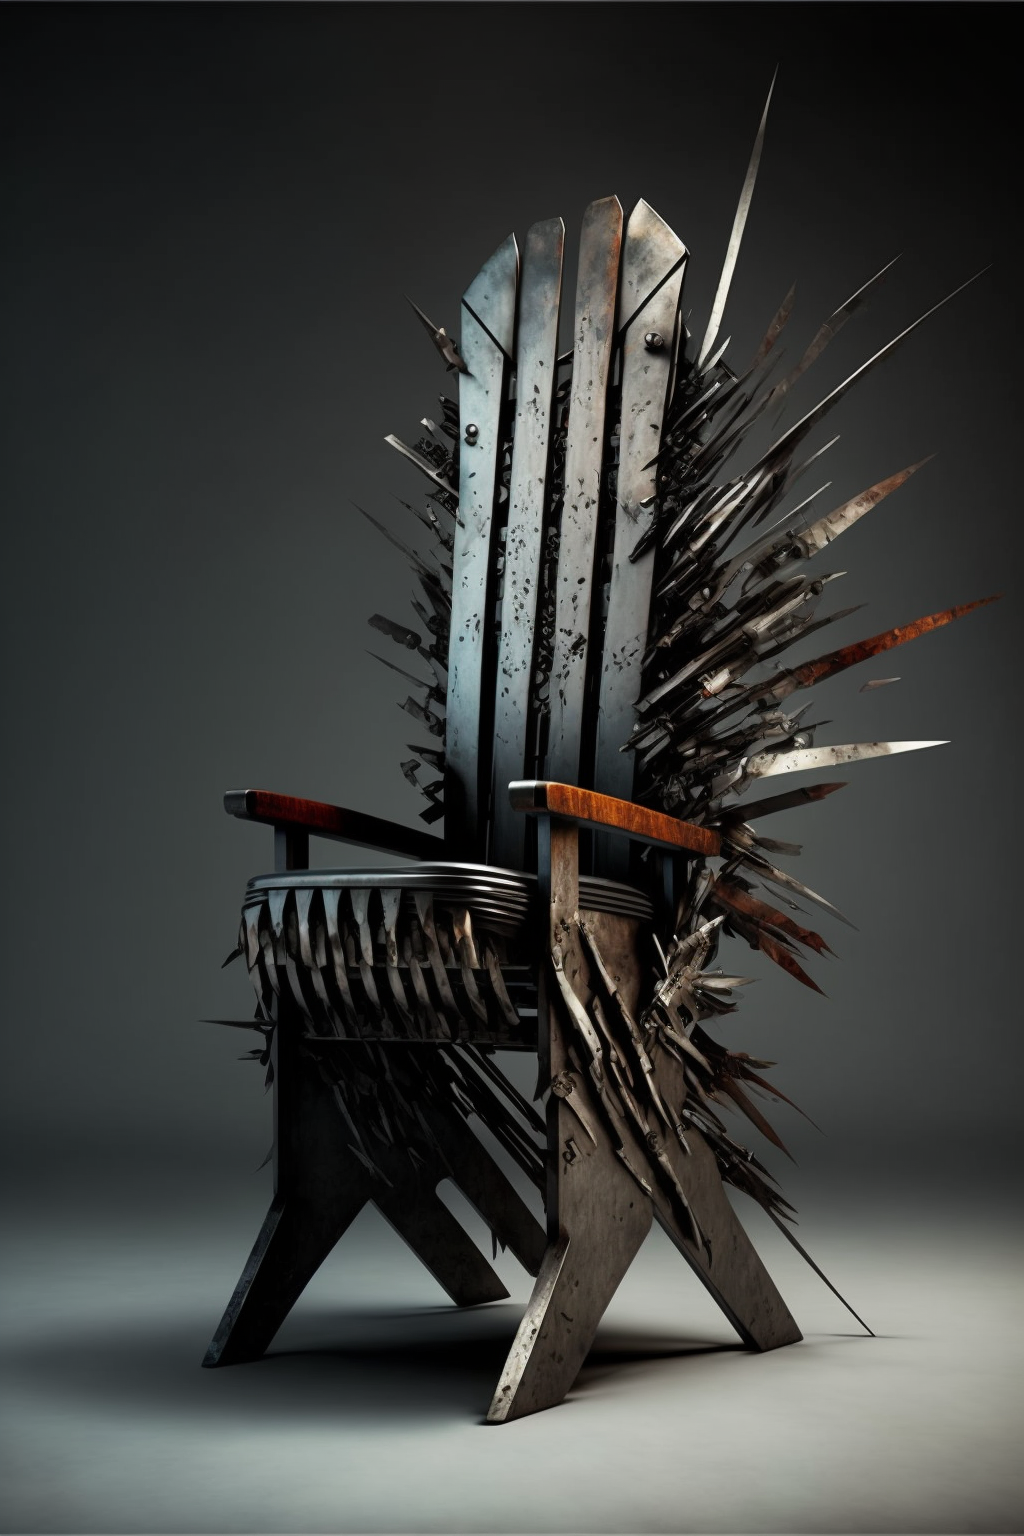 Chair in the style of Dystopian Blade Runnerism 4